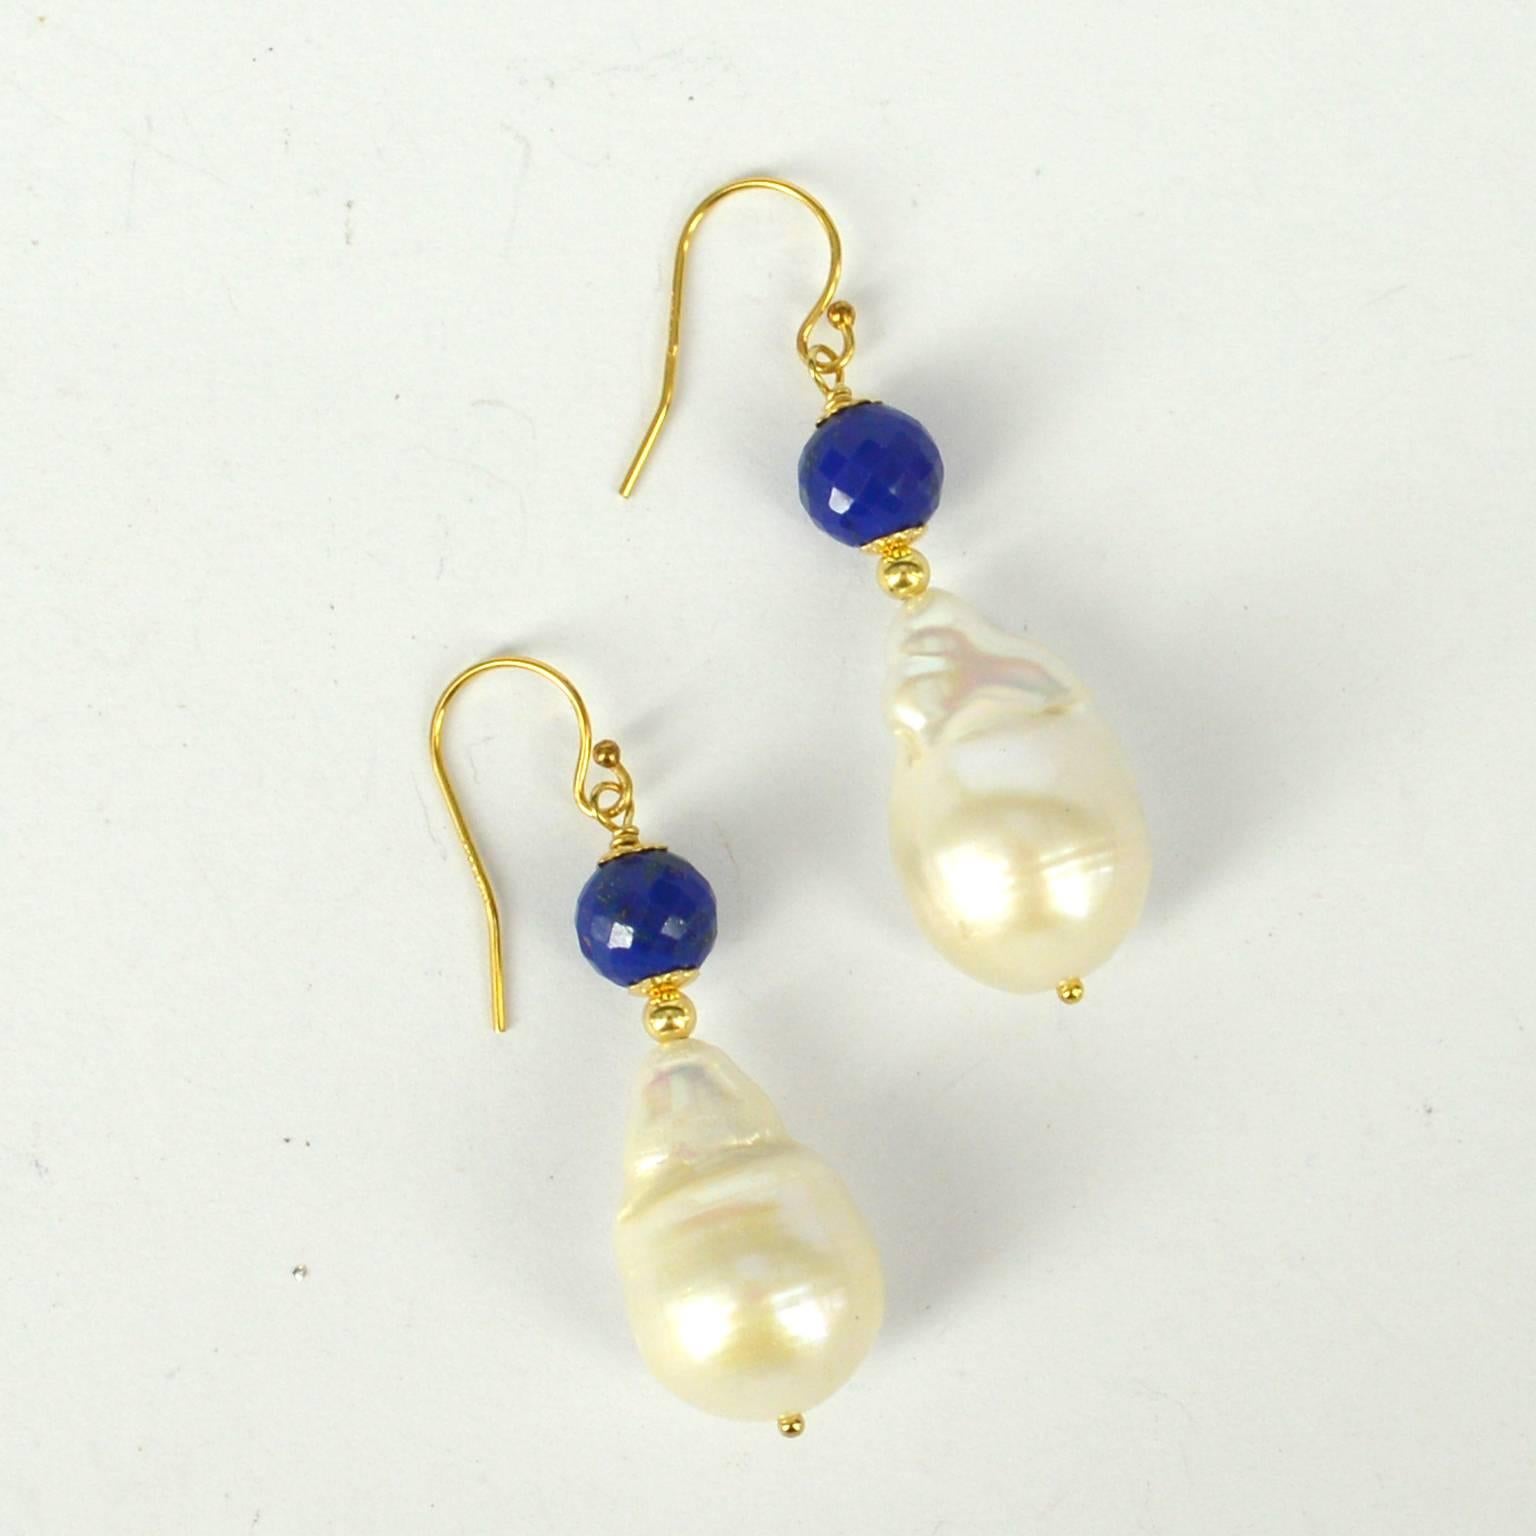 Beautifully multi faceted 8mm Lapis Lazuli sit above a tear drop Baroque Fresh Water Pearl 13x21mm.
All findings are 14k Gold Filled 
Total Earring length is 49mm